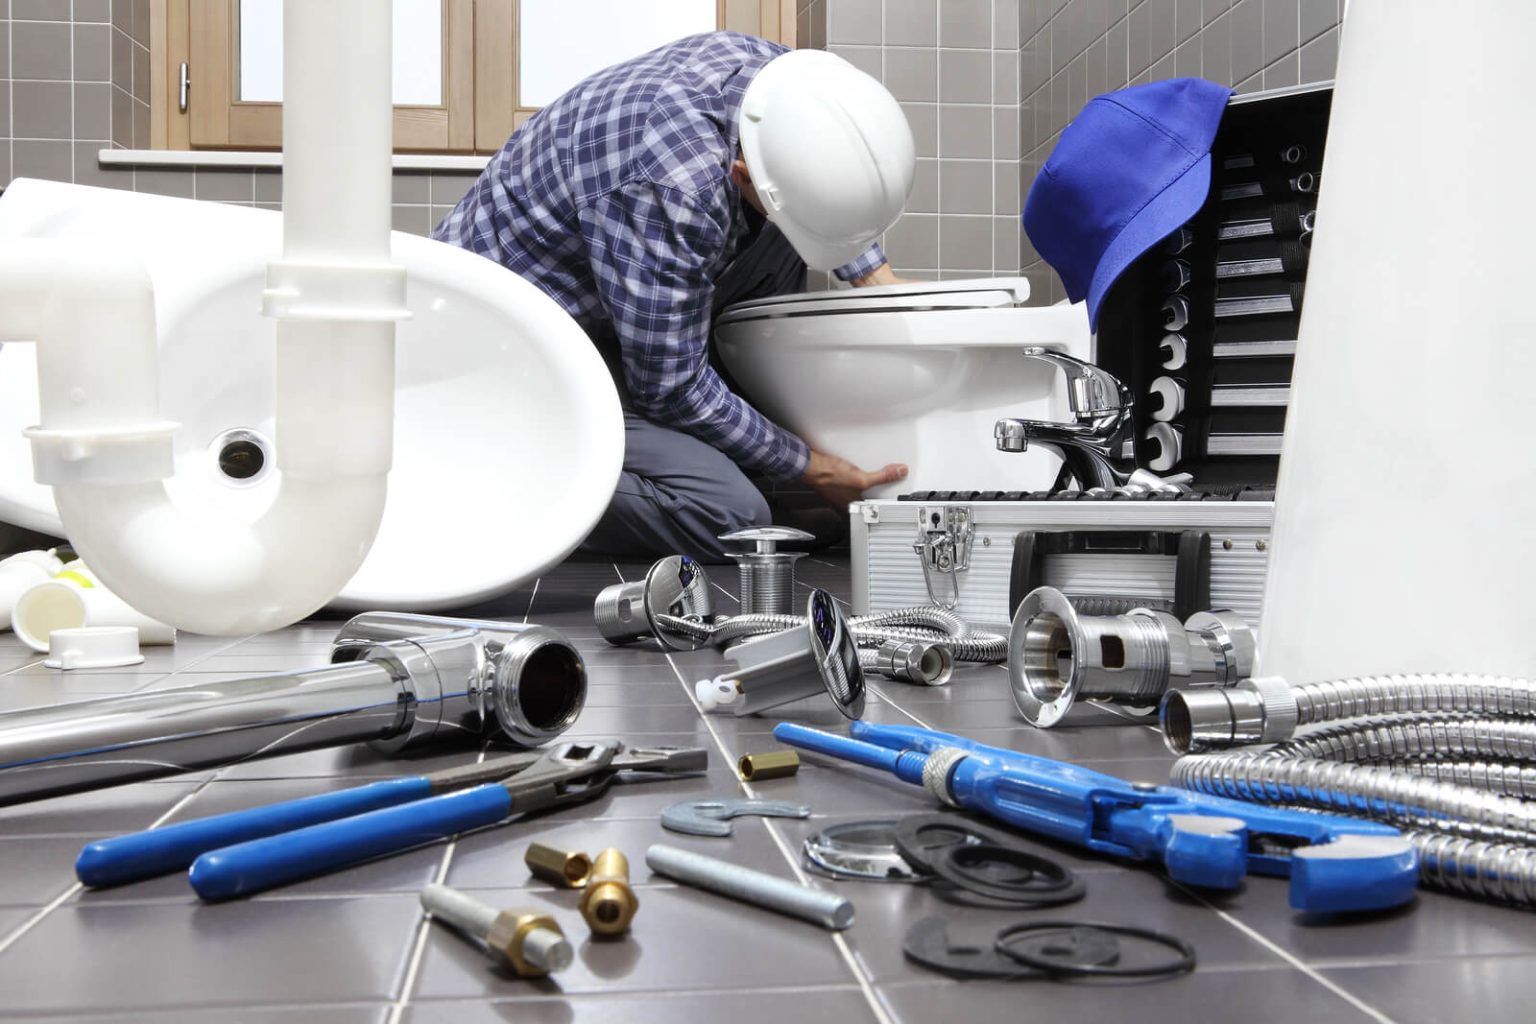 DIY Quick Fixes For 5 Common Plumbing Problems